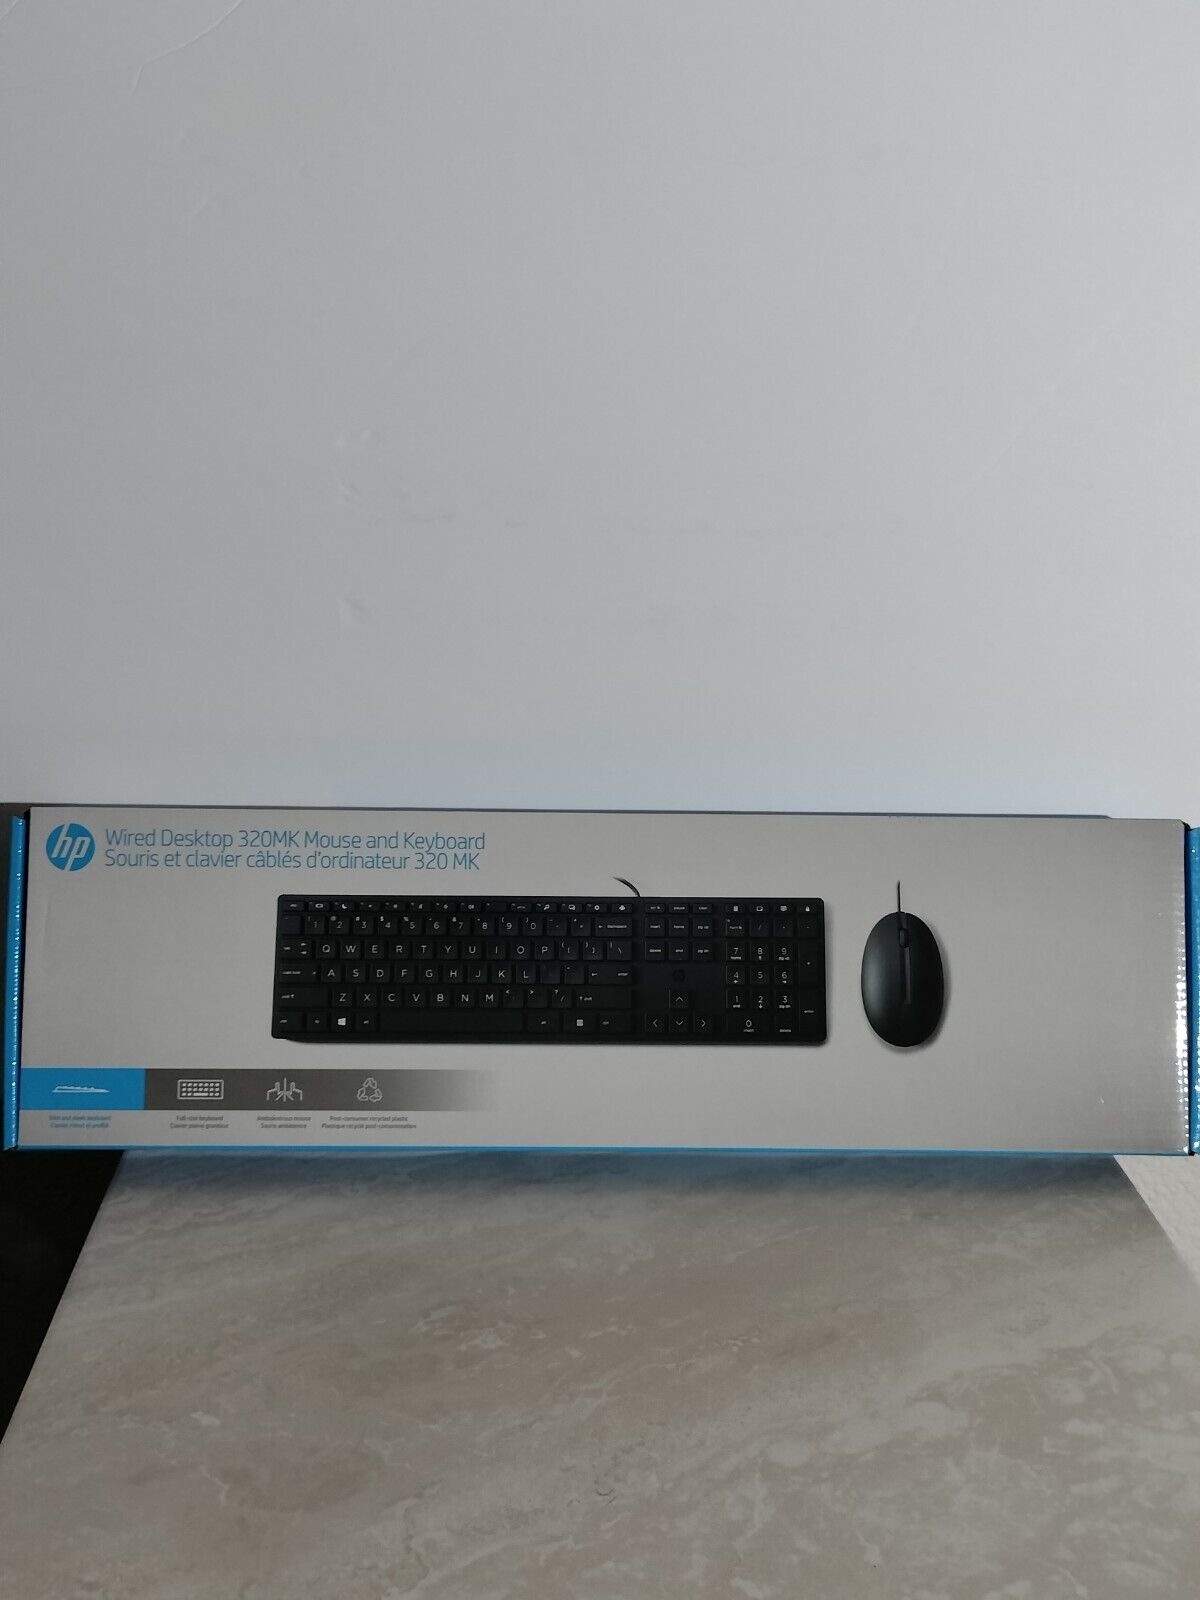 HP Wired Desktop 320MK Mouse and Keyboard Factory Sealed USB